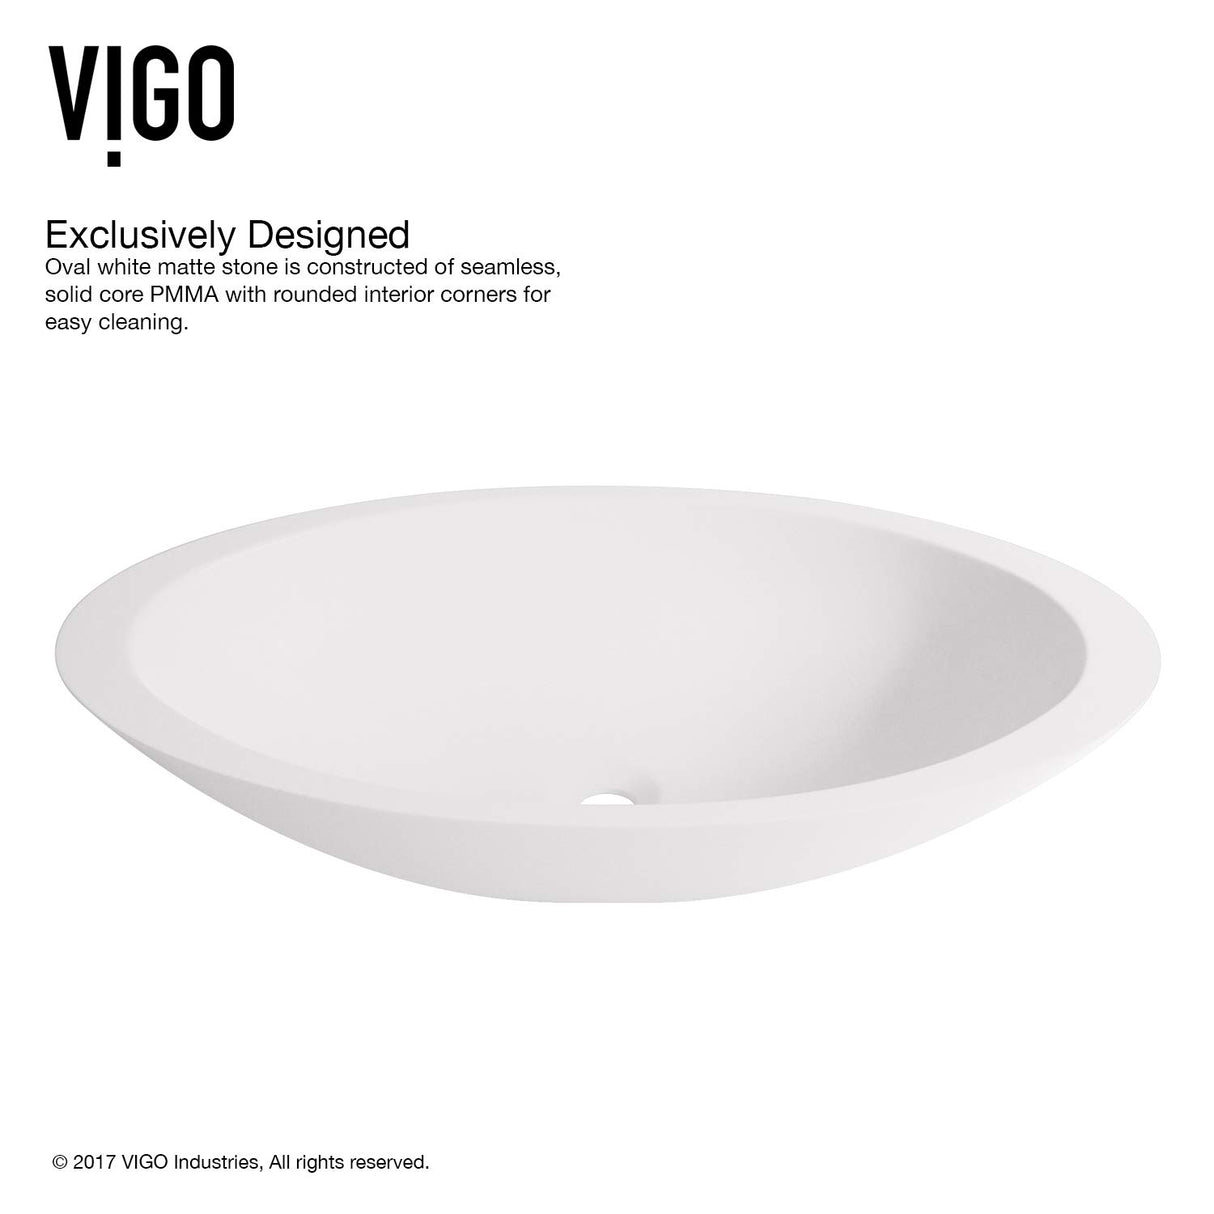 VIGO VGT1241 13.5" L -23.13" W -12.38" H Handmade Countertop Matte Stone Oval Vessel Bathroom Sink Set in Matte White Finish with Antique Rubbed Bronze Single-Handle Faucet and Pop Up Drain